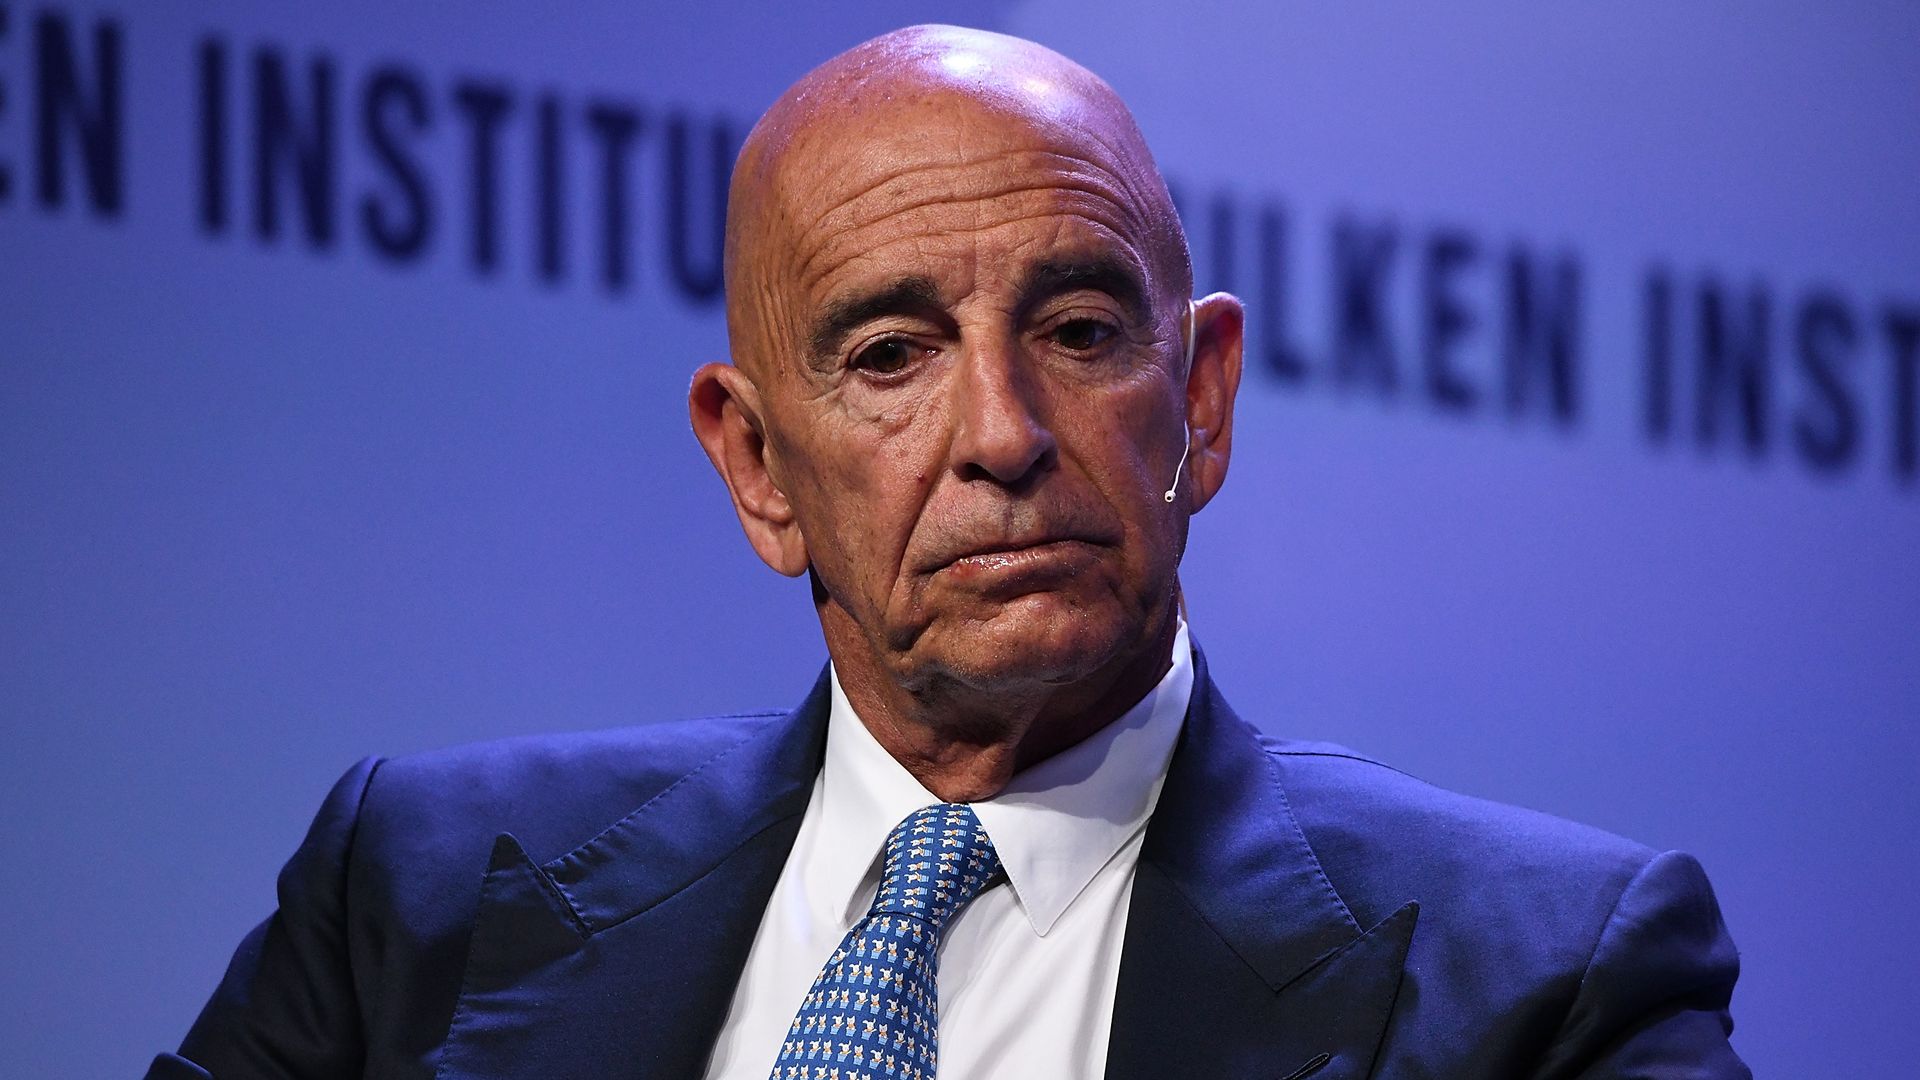 Thomas Barrack, Executive Chairman and CEO, Colony Capital, participates in a panel discussion during the annual Milken Institute Global Conference 